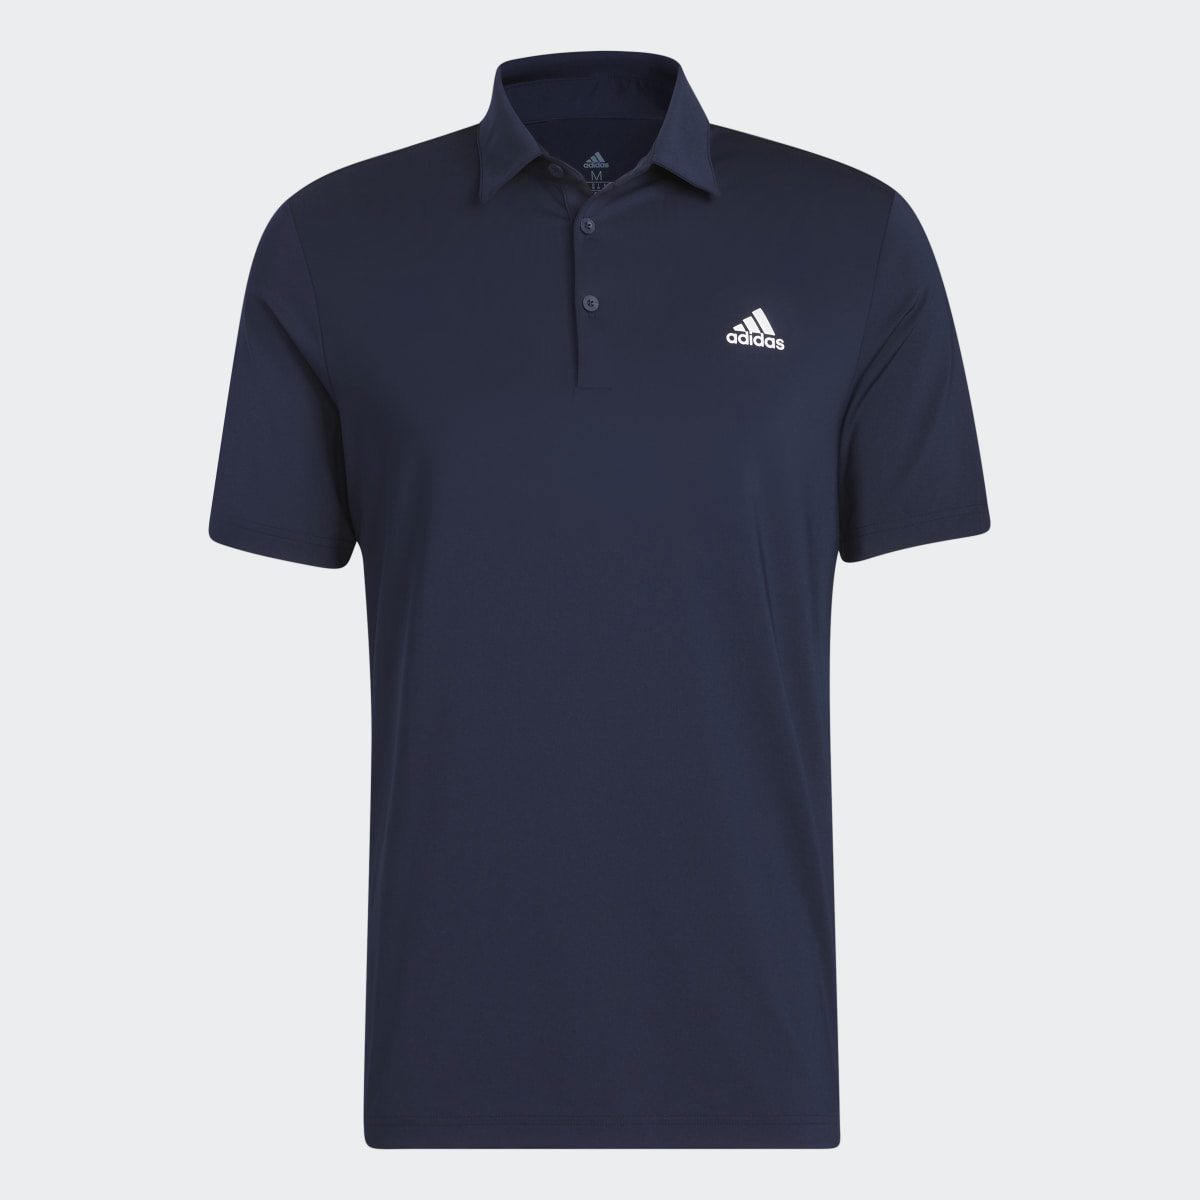 Adidas Ultimate365 Solid Left Chest Polo Shirt. 5